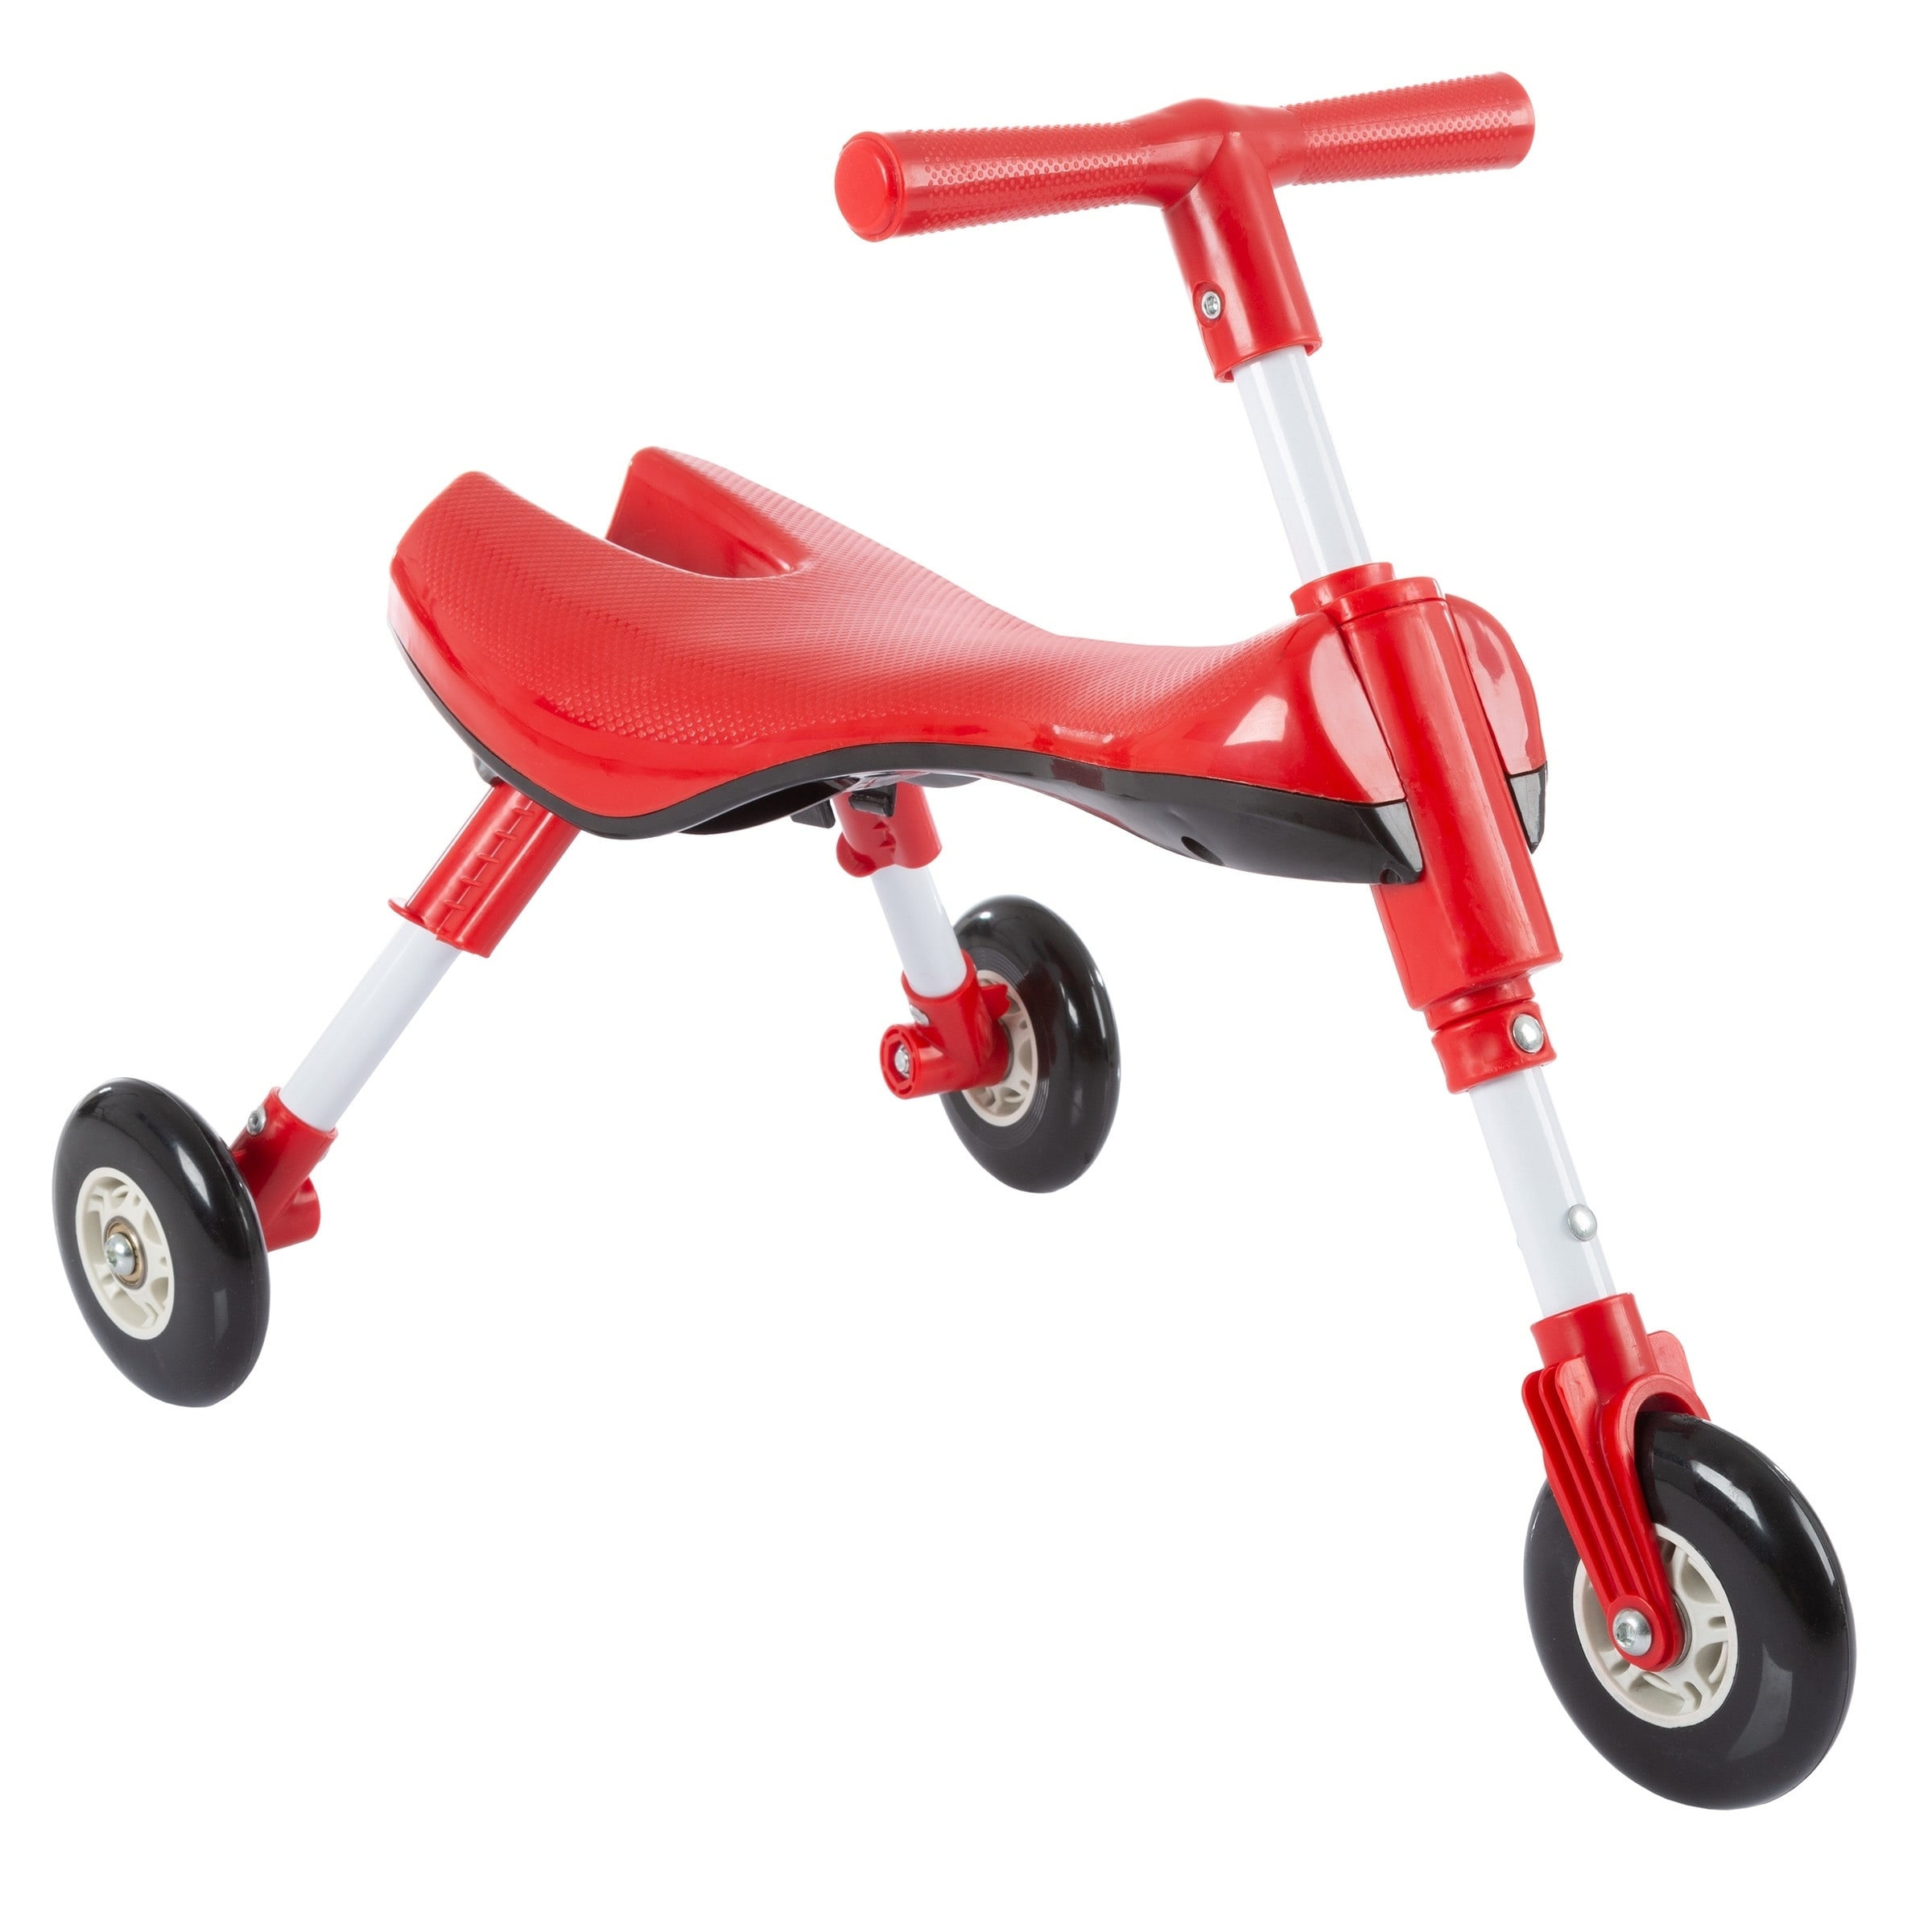 ride and stand trike